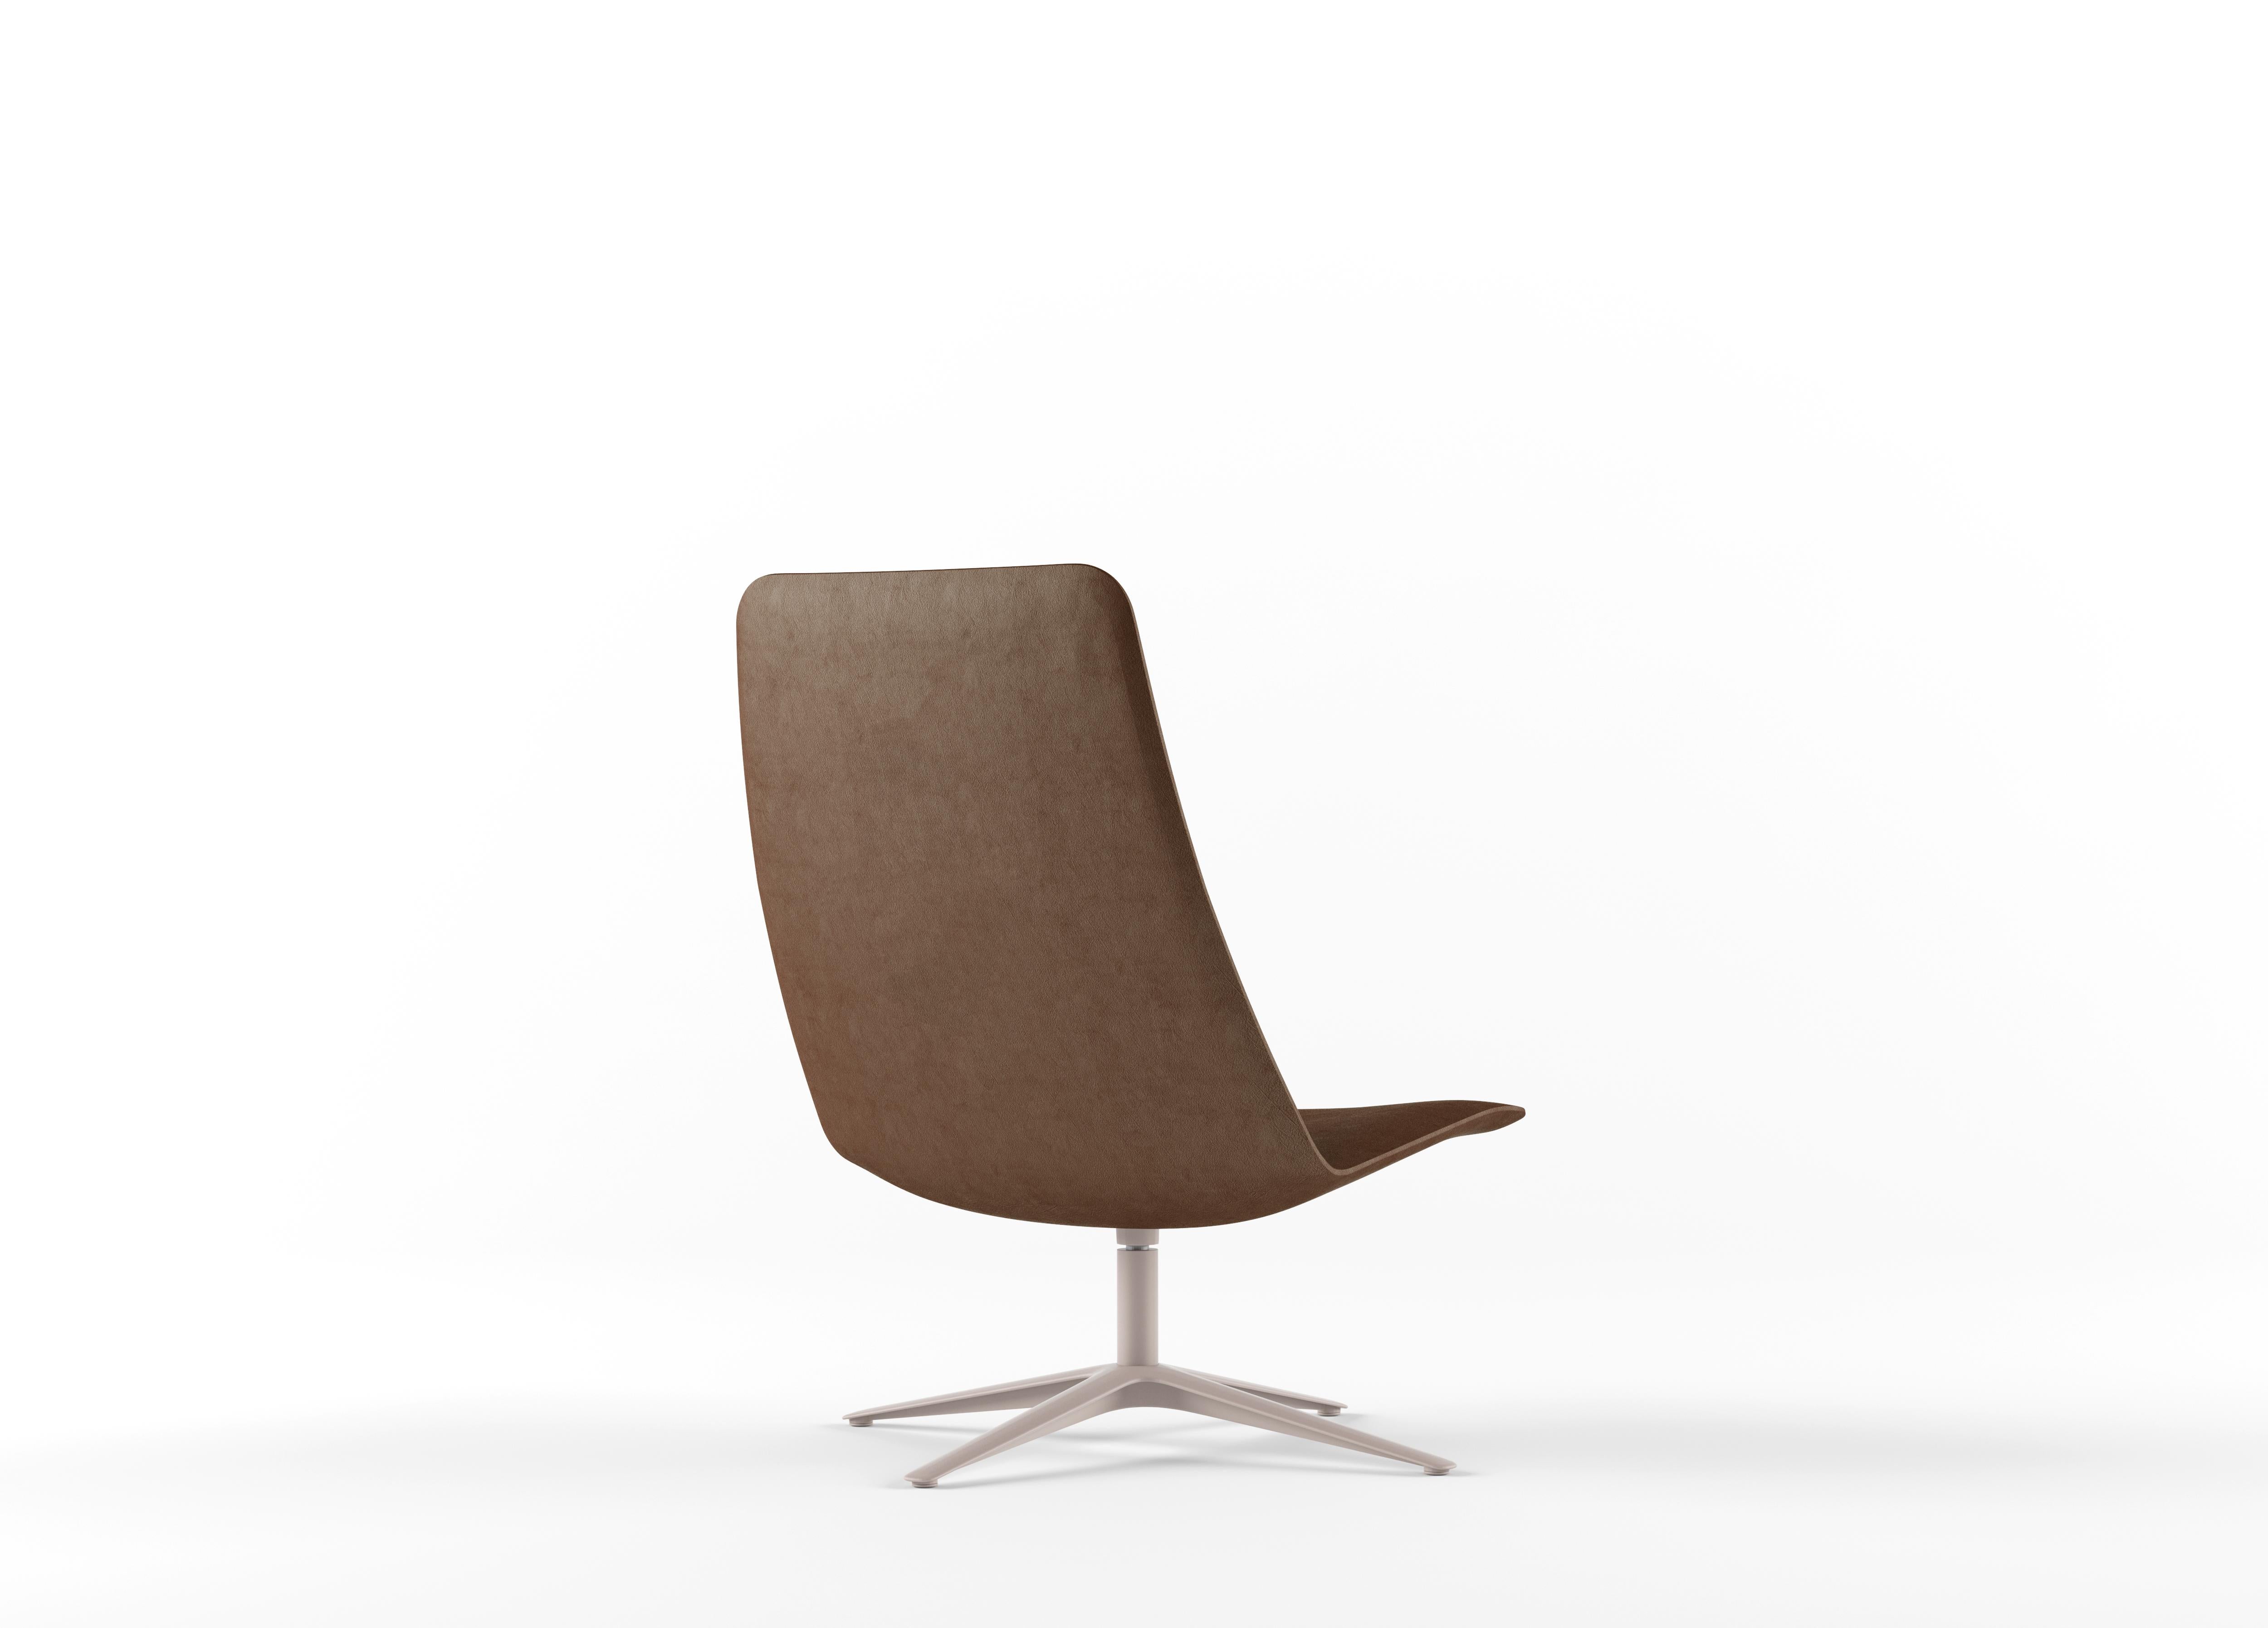 Alias 817 Slim Lounge High Chair in Brown Leather Seat with Sand Lacquered Frame by PearsonLloyd

Self adjusting swivel base armchair with 4-star base. Structure made of die cast aluminium lacquered, polished or chromed. Seat shell made of printed